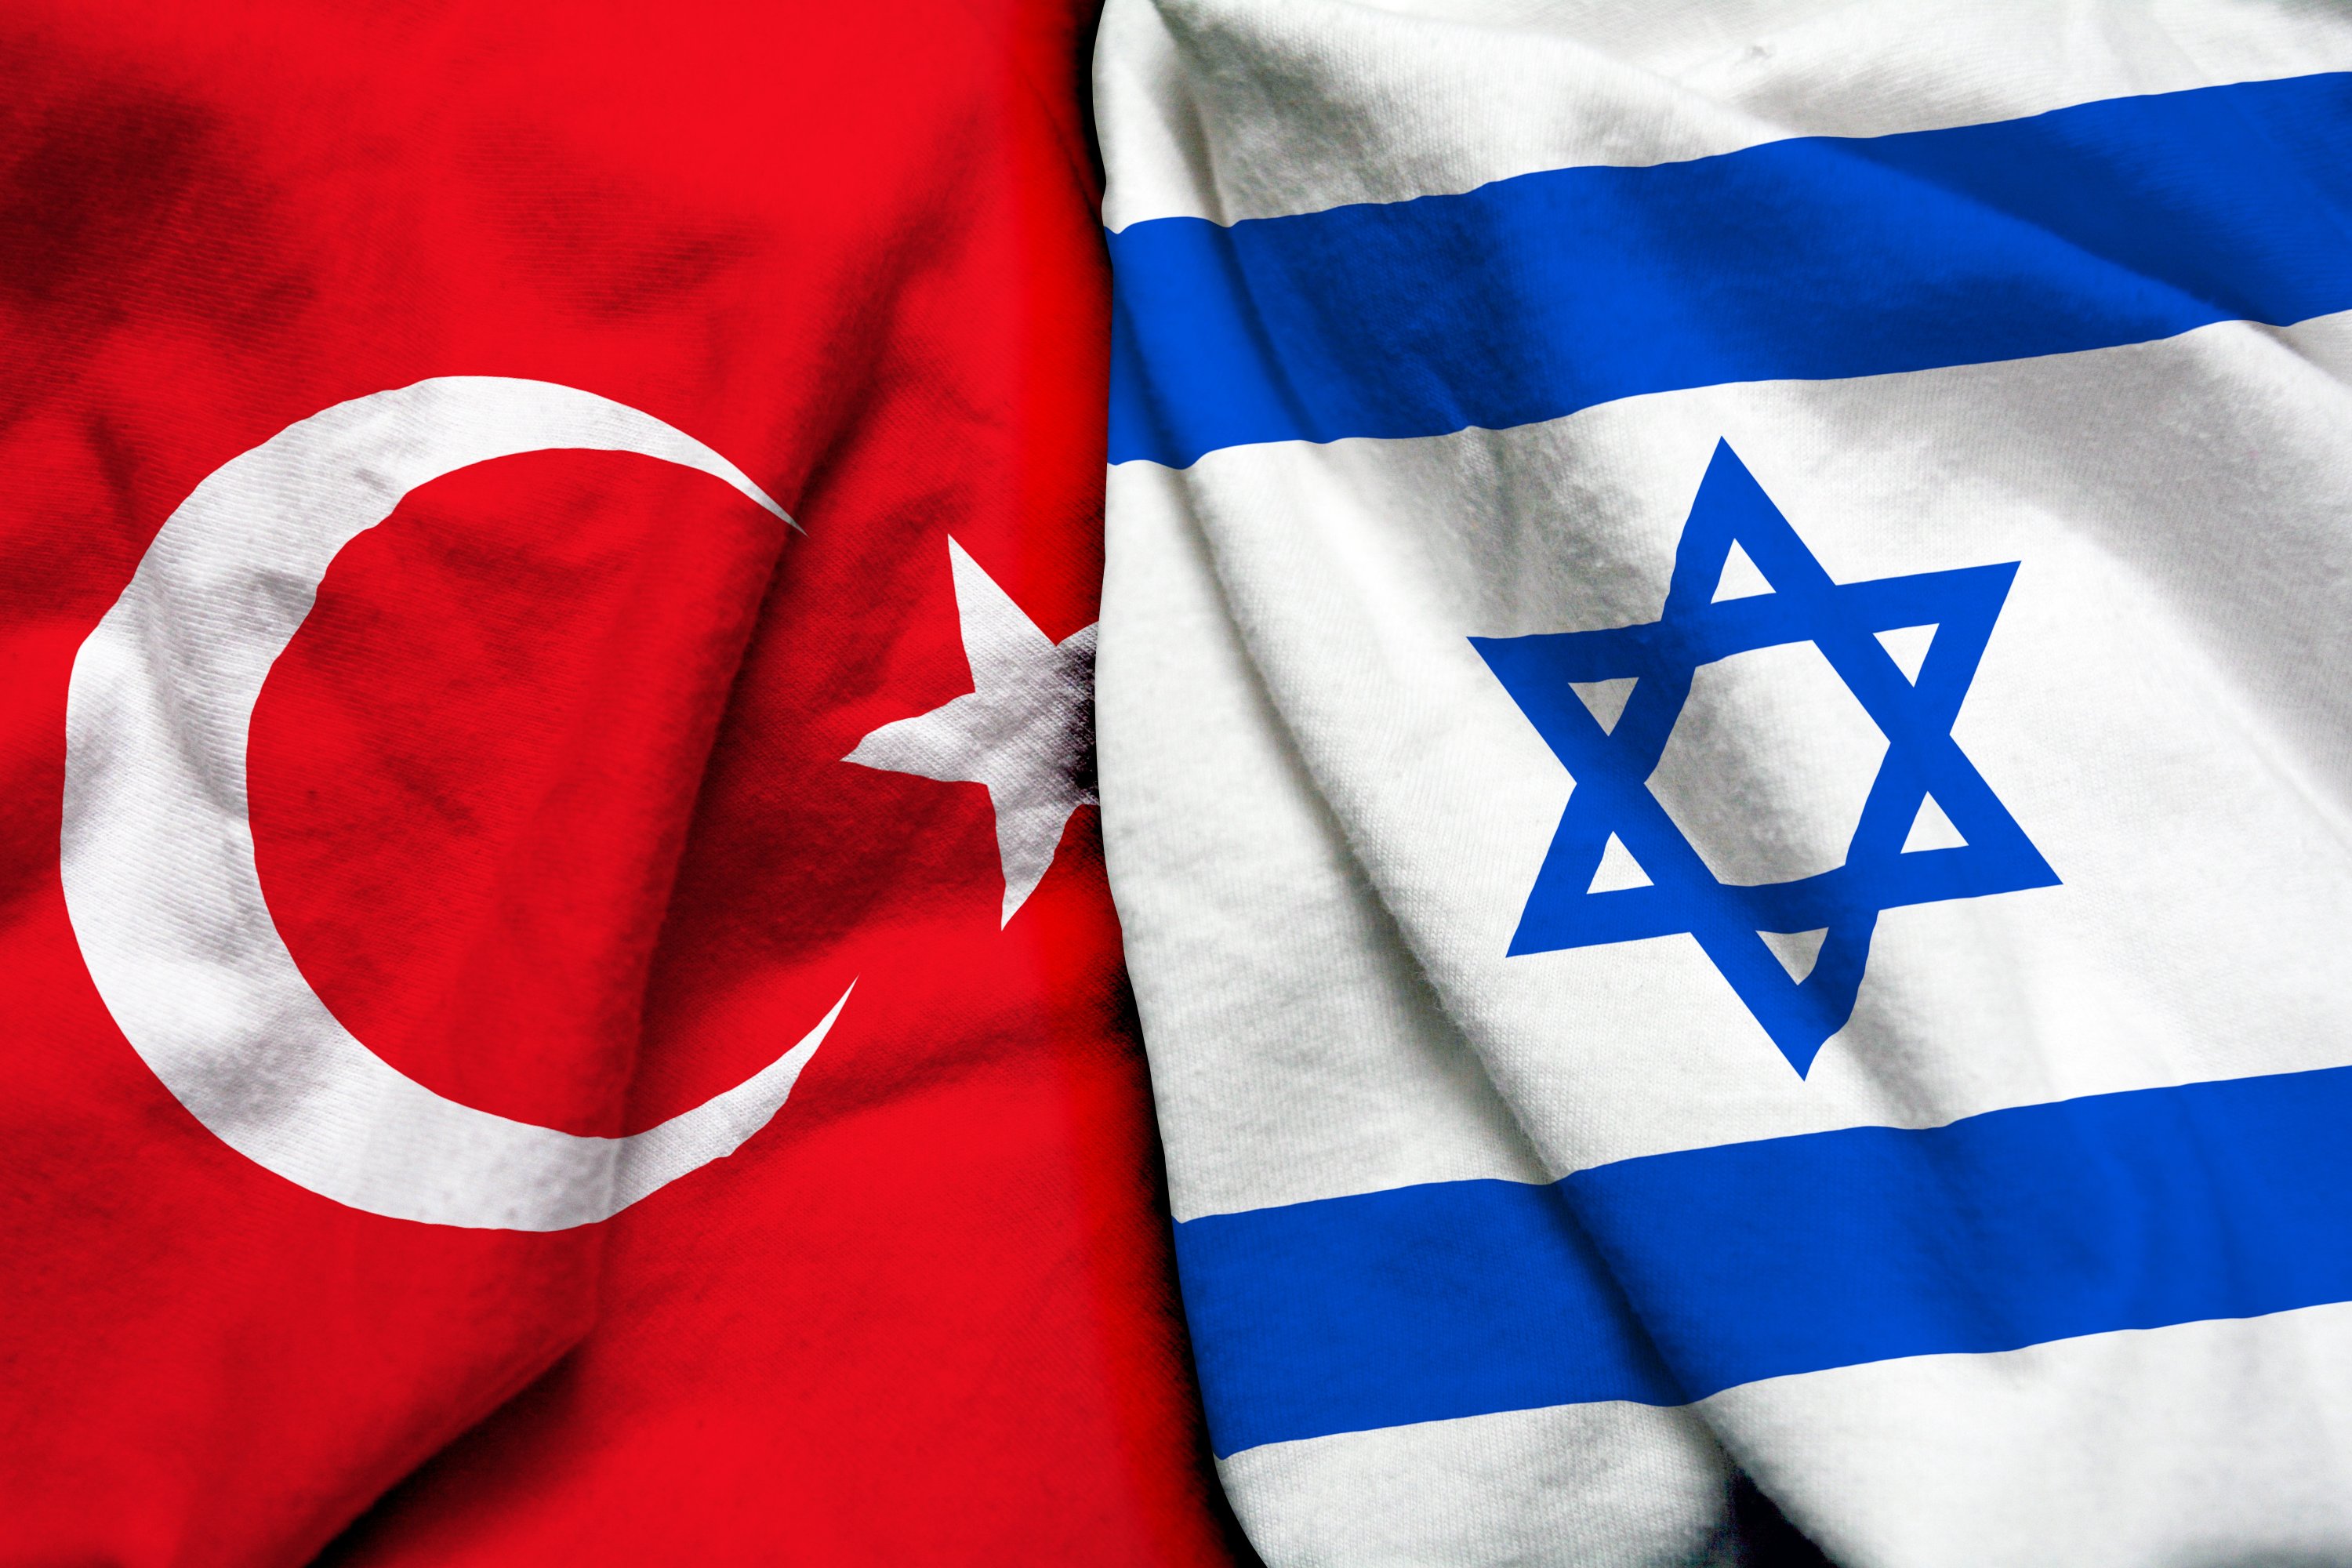 No surprise if Turkey-Israel relations normalize soon | Column